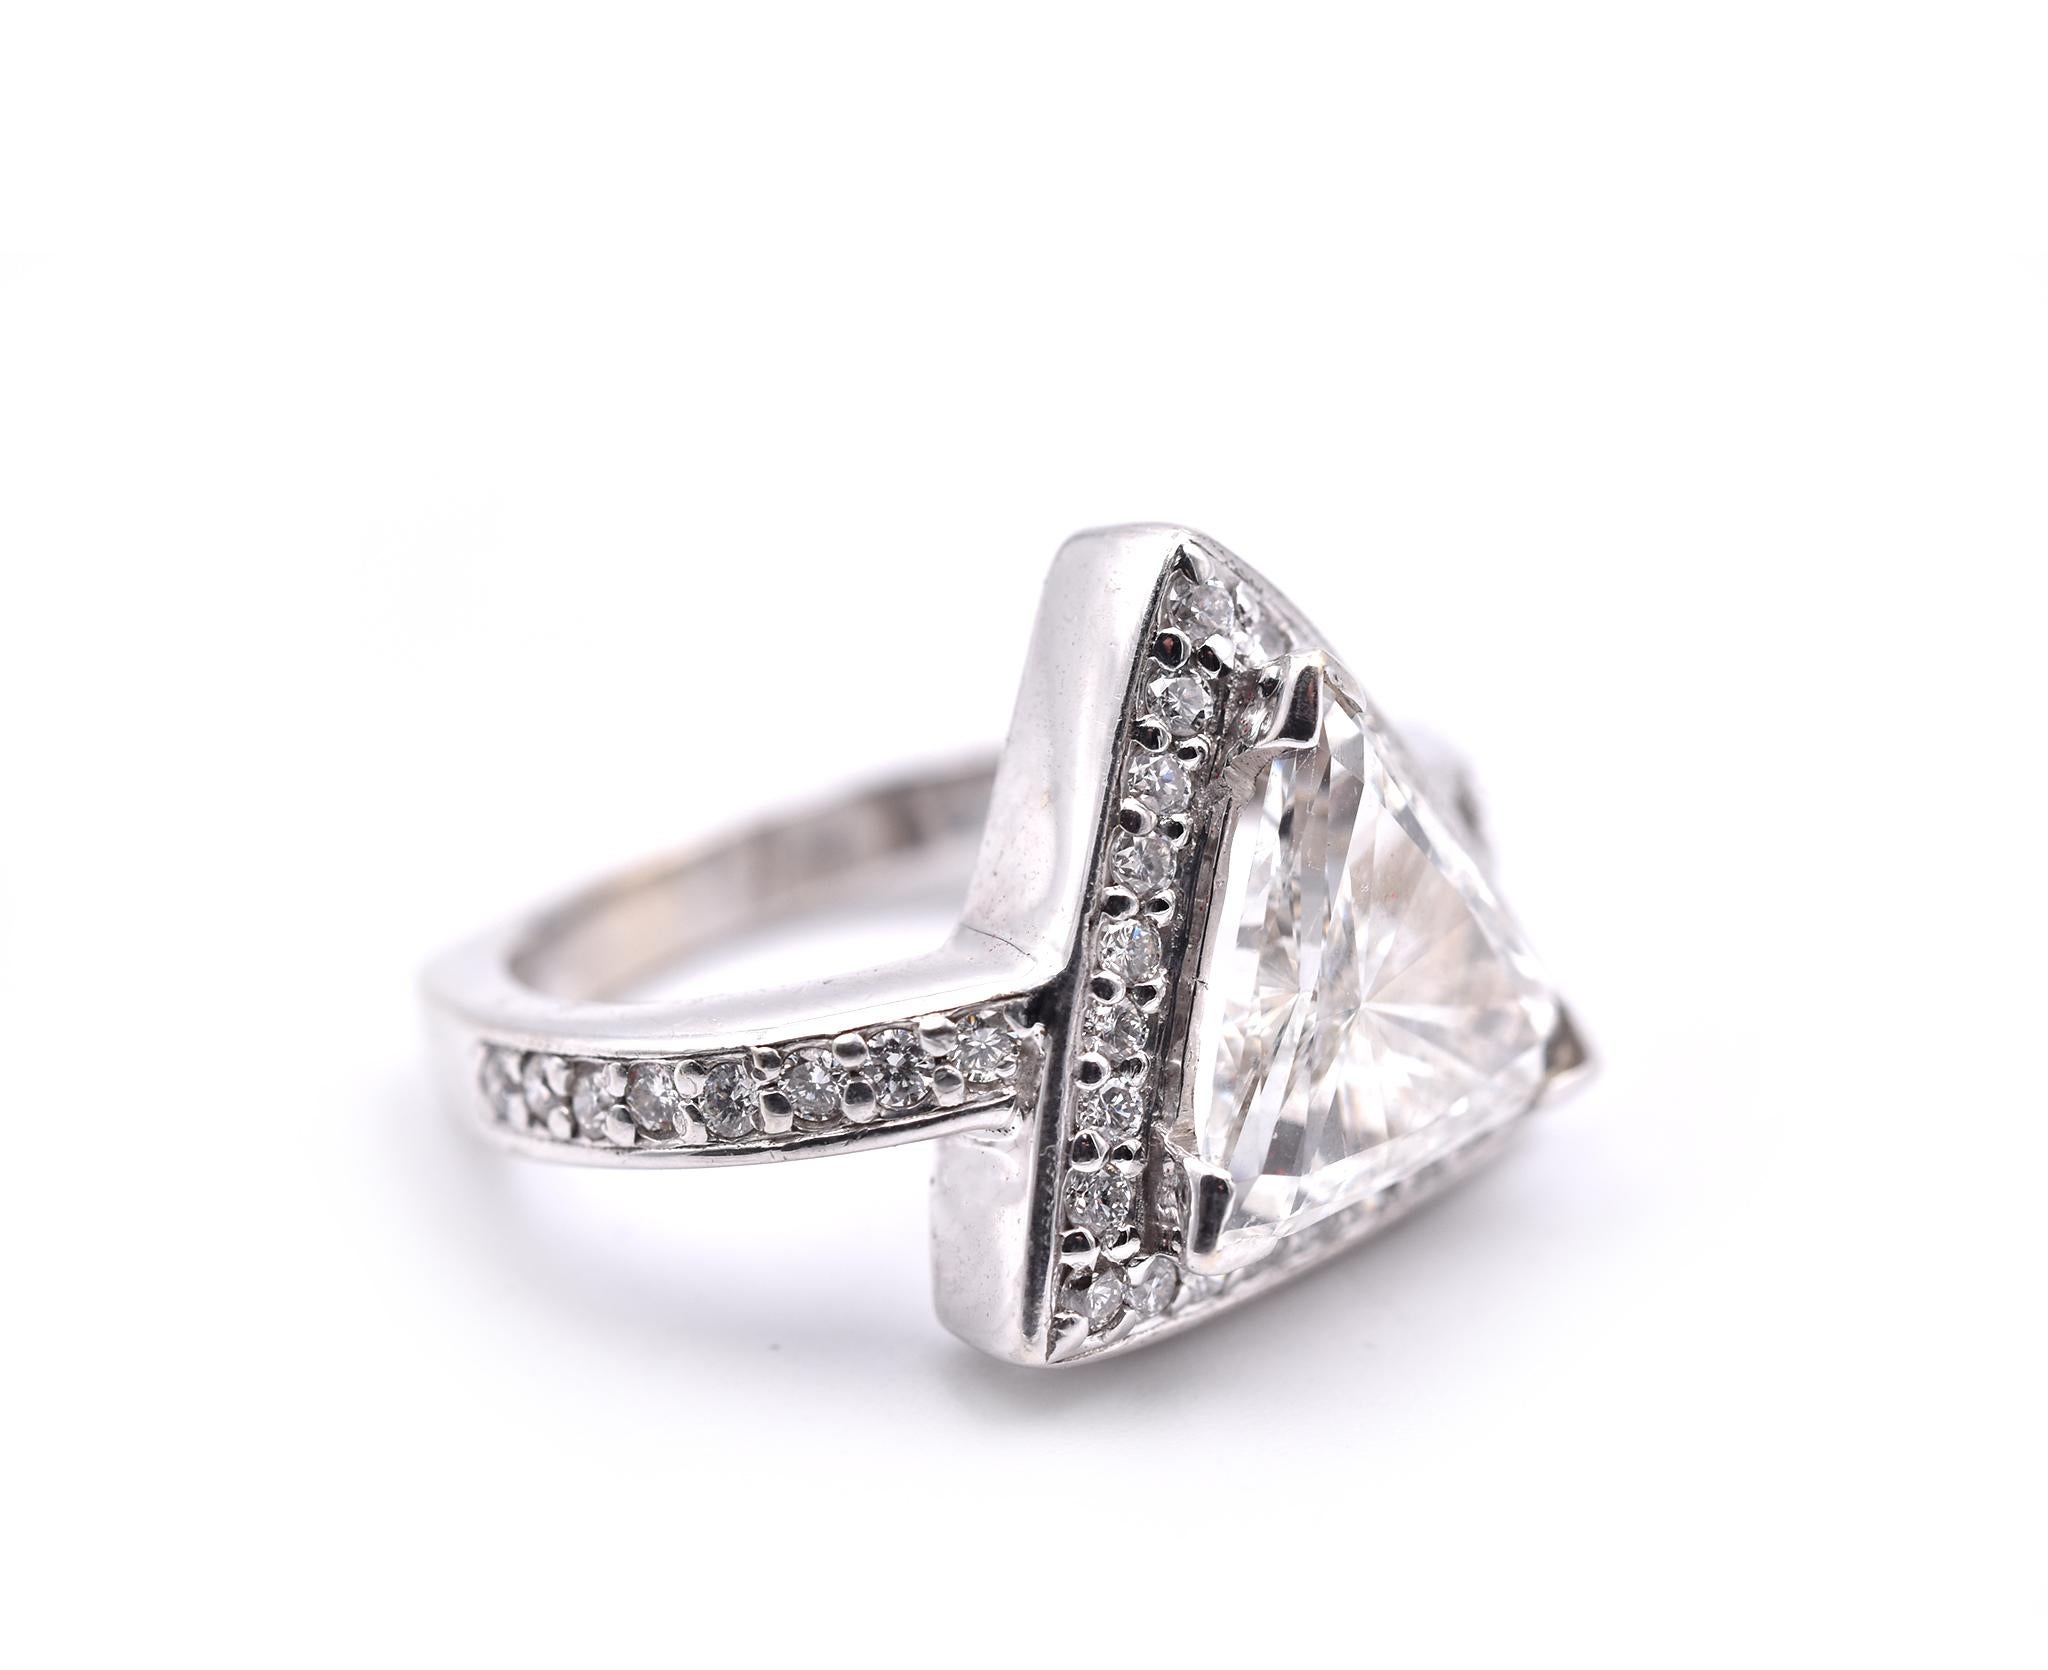 Designer: custom design
Material: 18k white gold with modified Euro shank
Center Diamond: 1 trillion cut= 2.01ct
Color: I
Clarity: SI1
Diamonds: 39 round brilliant cut= .60cttw
Color: G
Clarity: VS
Ring size: 6 (please allow two additional shipping